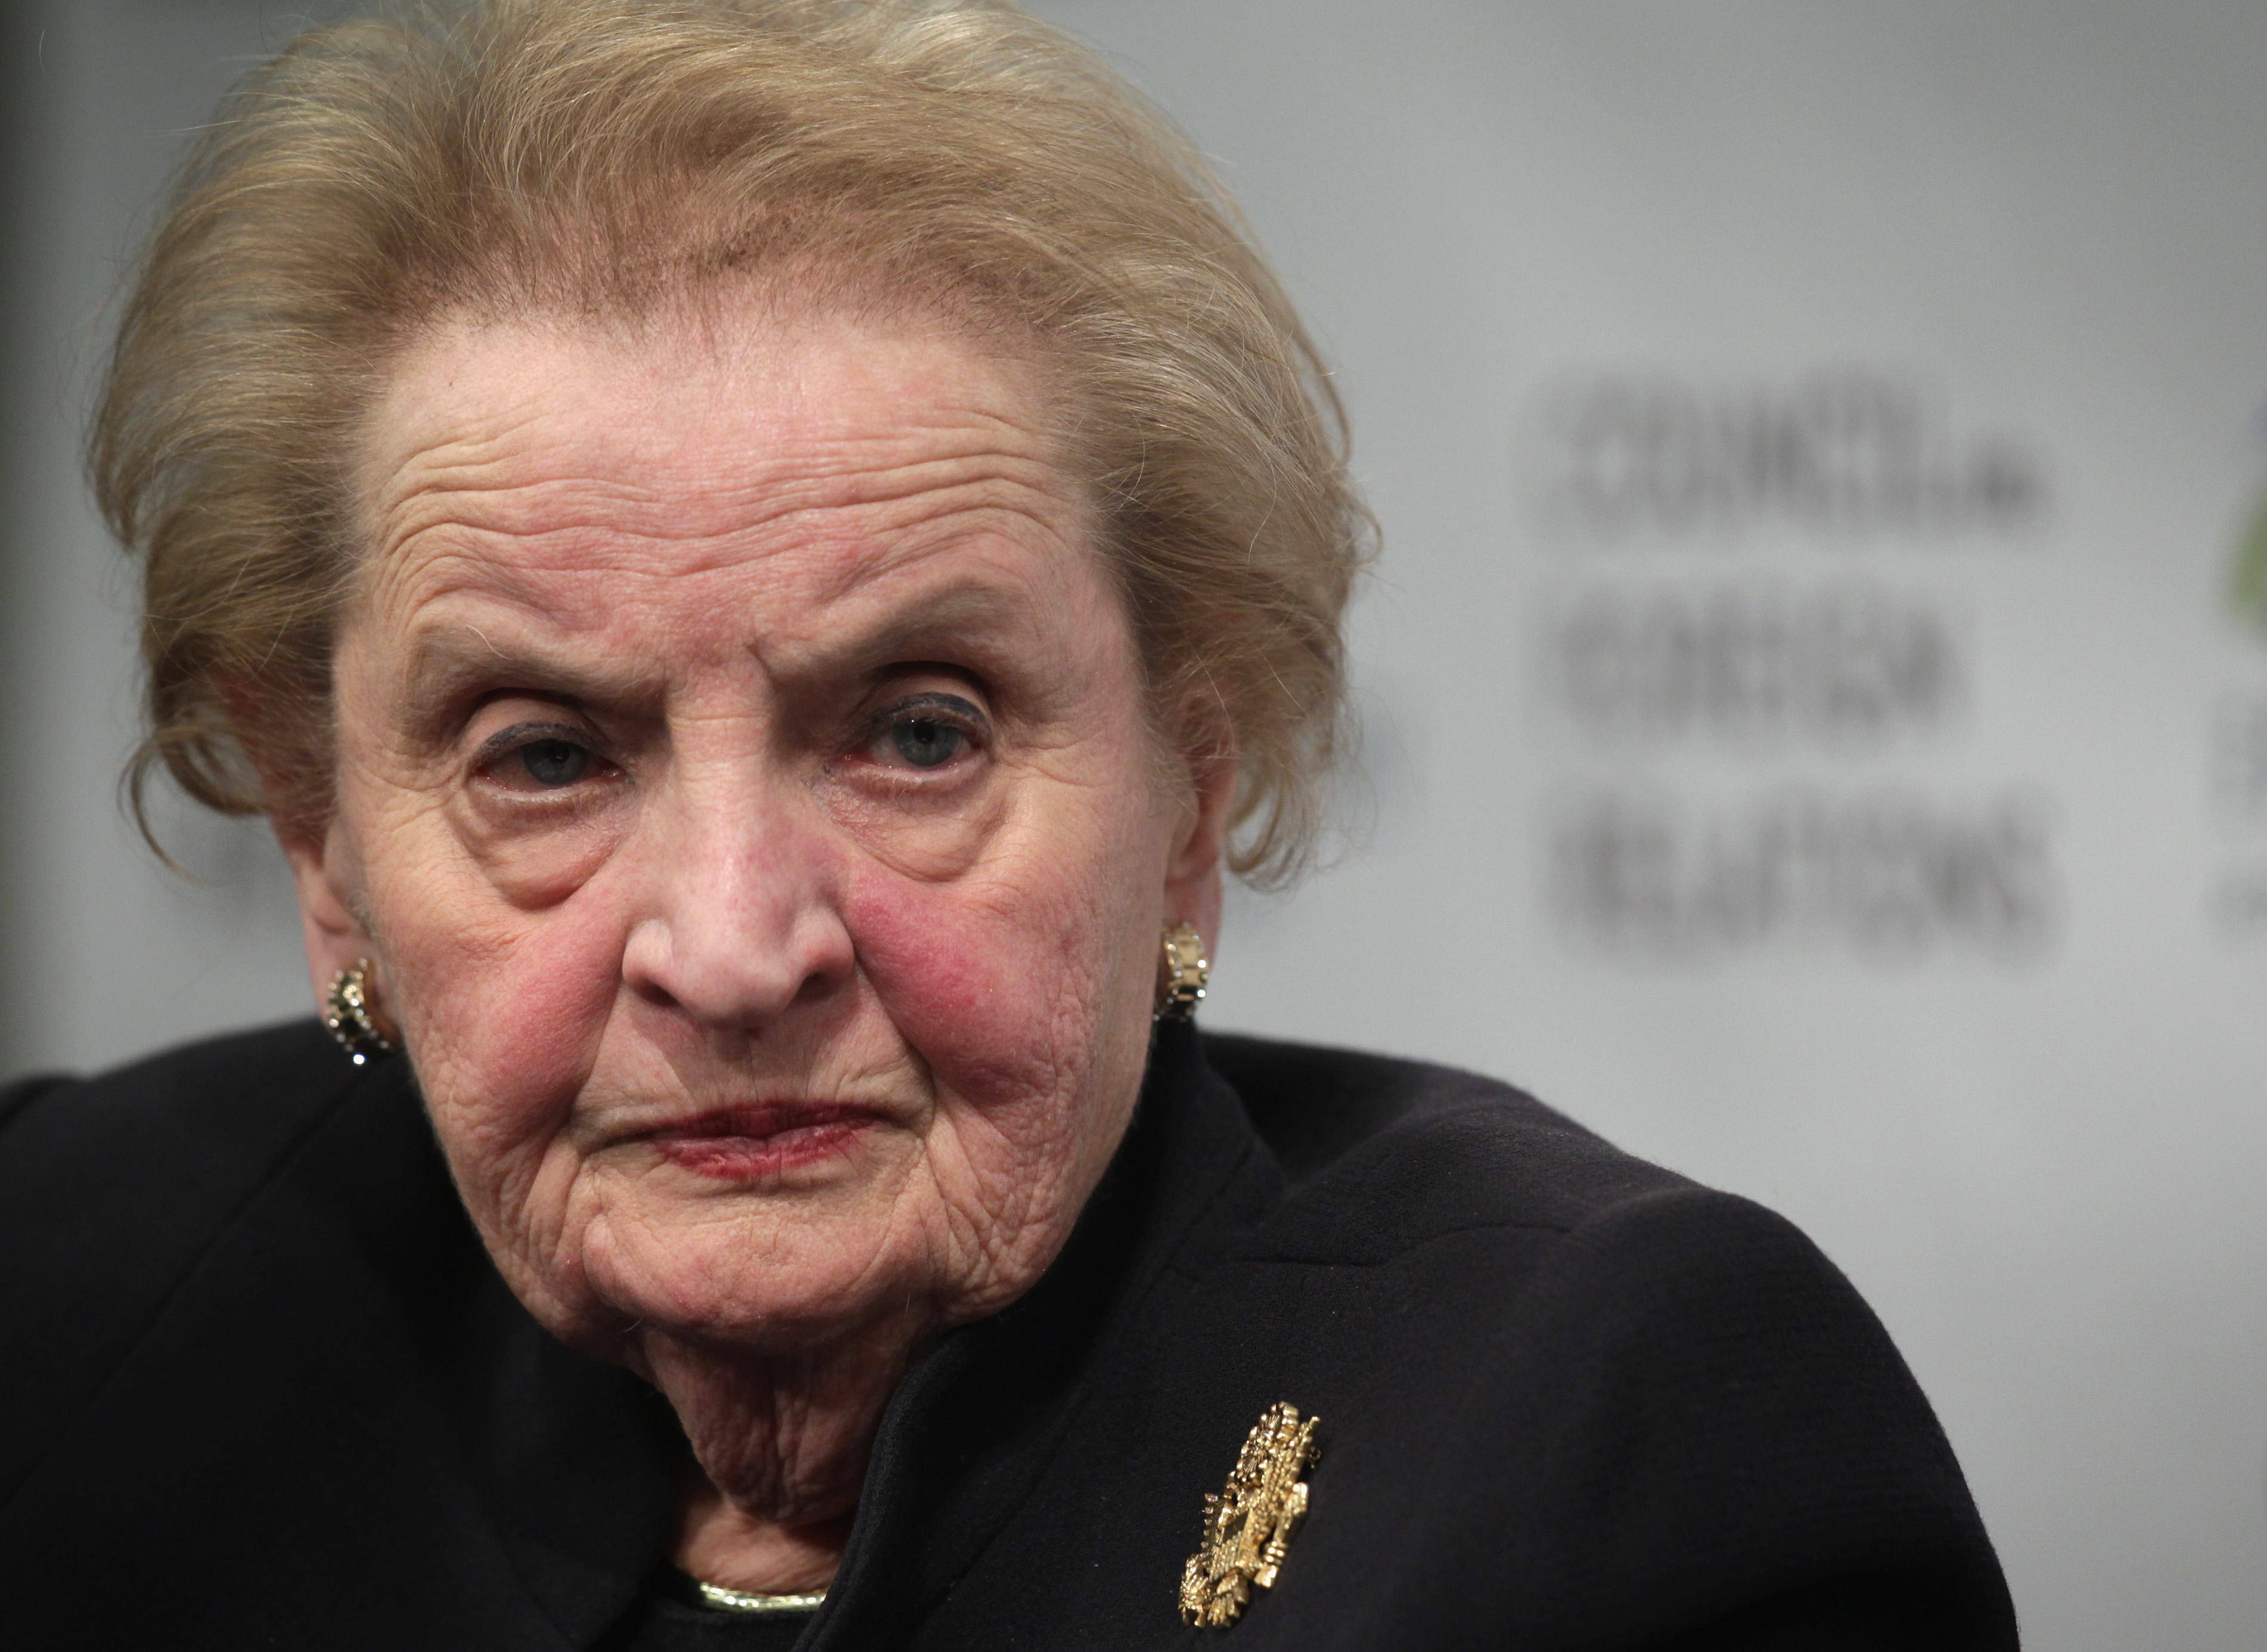 Former U.S. Secretary of State Madeleine Albright participates in a discussion at the Council on Foreign Relations in Washington, D.C., on January 29, 2015.